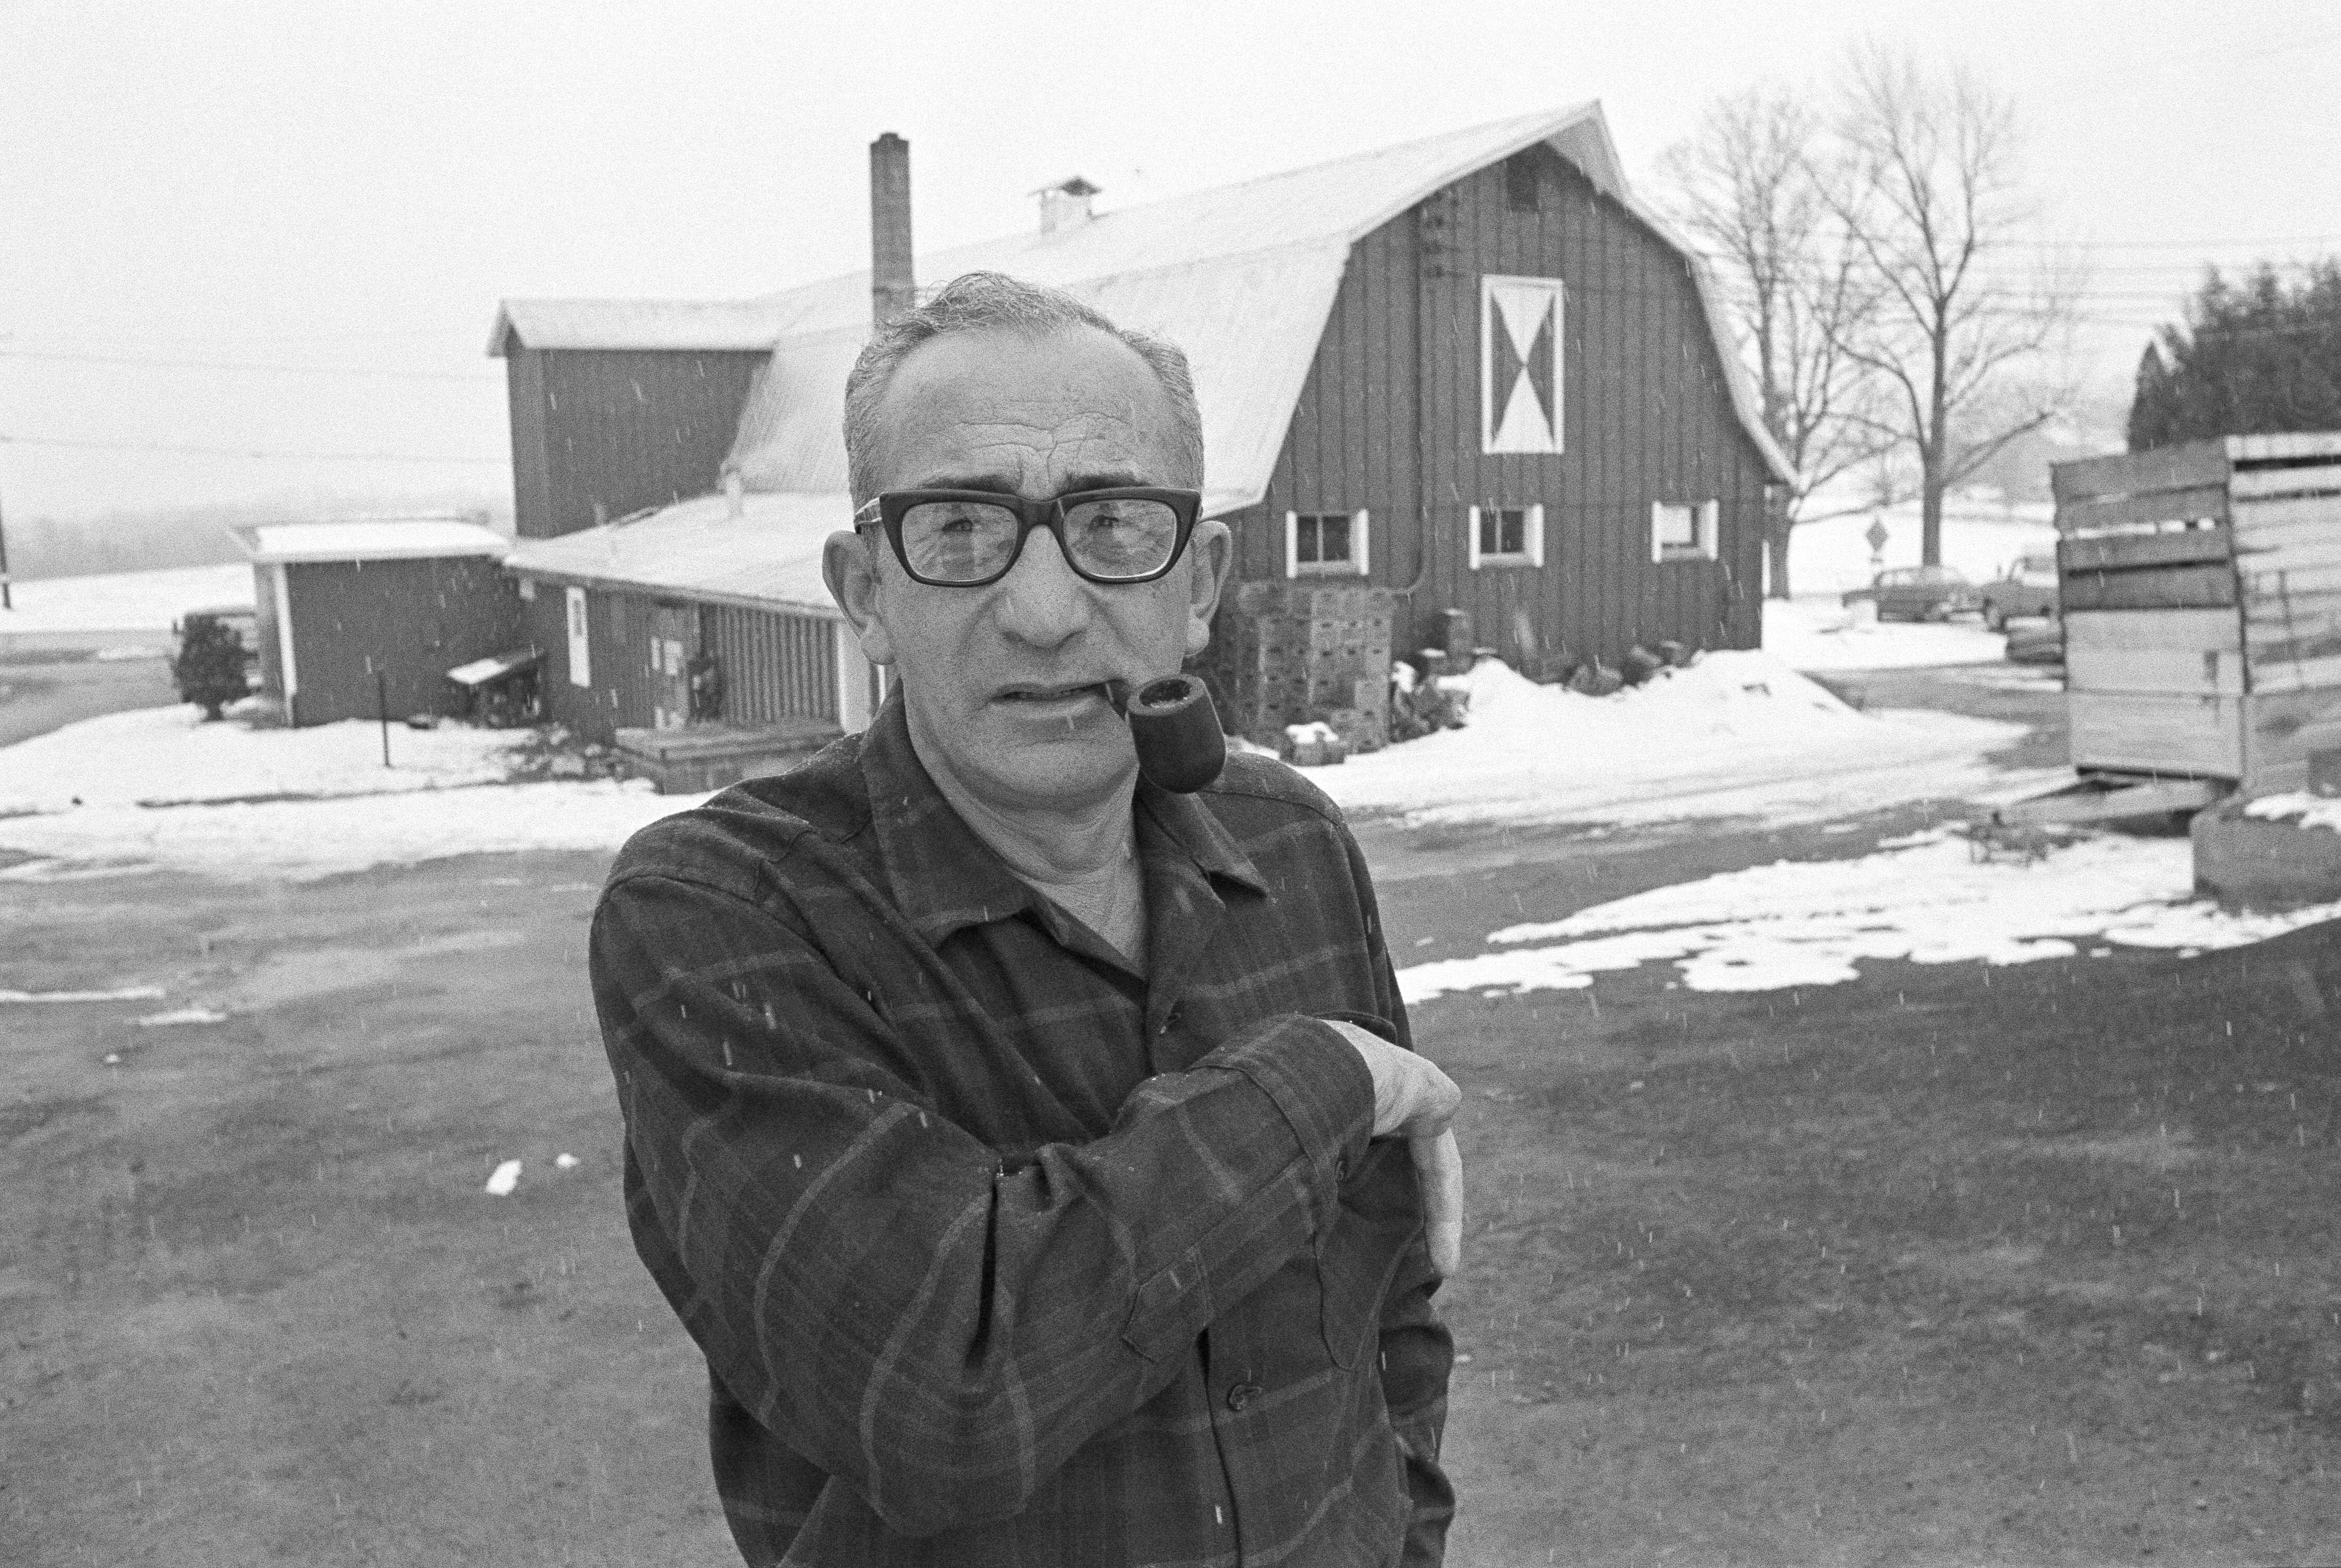 Max Yasgur poses at his farm near Bethel, N.Y. on March 23, 1970.  Yasgur, who rented his farms for the Woodstock Music festival in 1969, received over 3,000 letters from young people who came to the weekend festival, some letters addressed to "the groovy farmer at the festival."  His fields will be used for crops again this year.  (AP Photo)